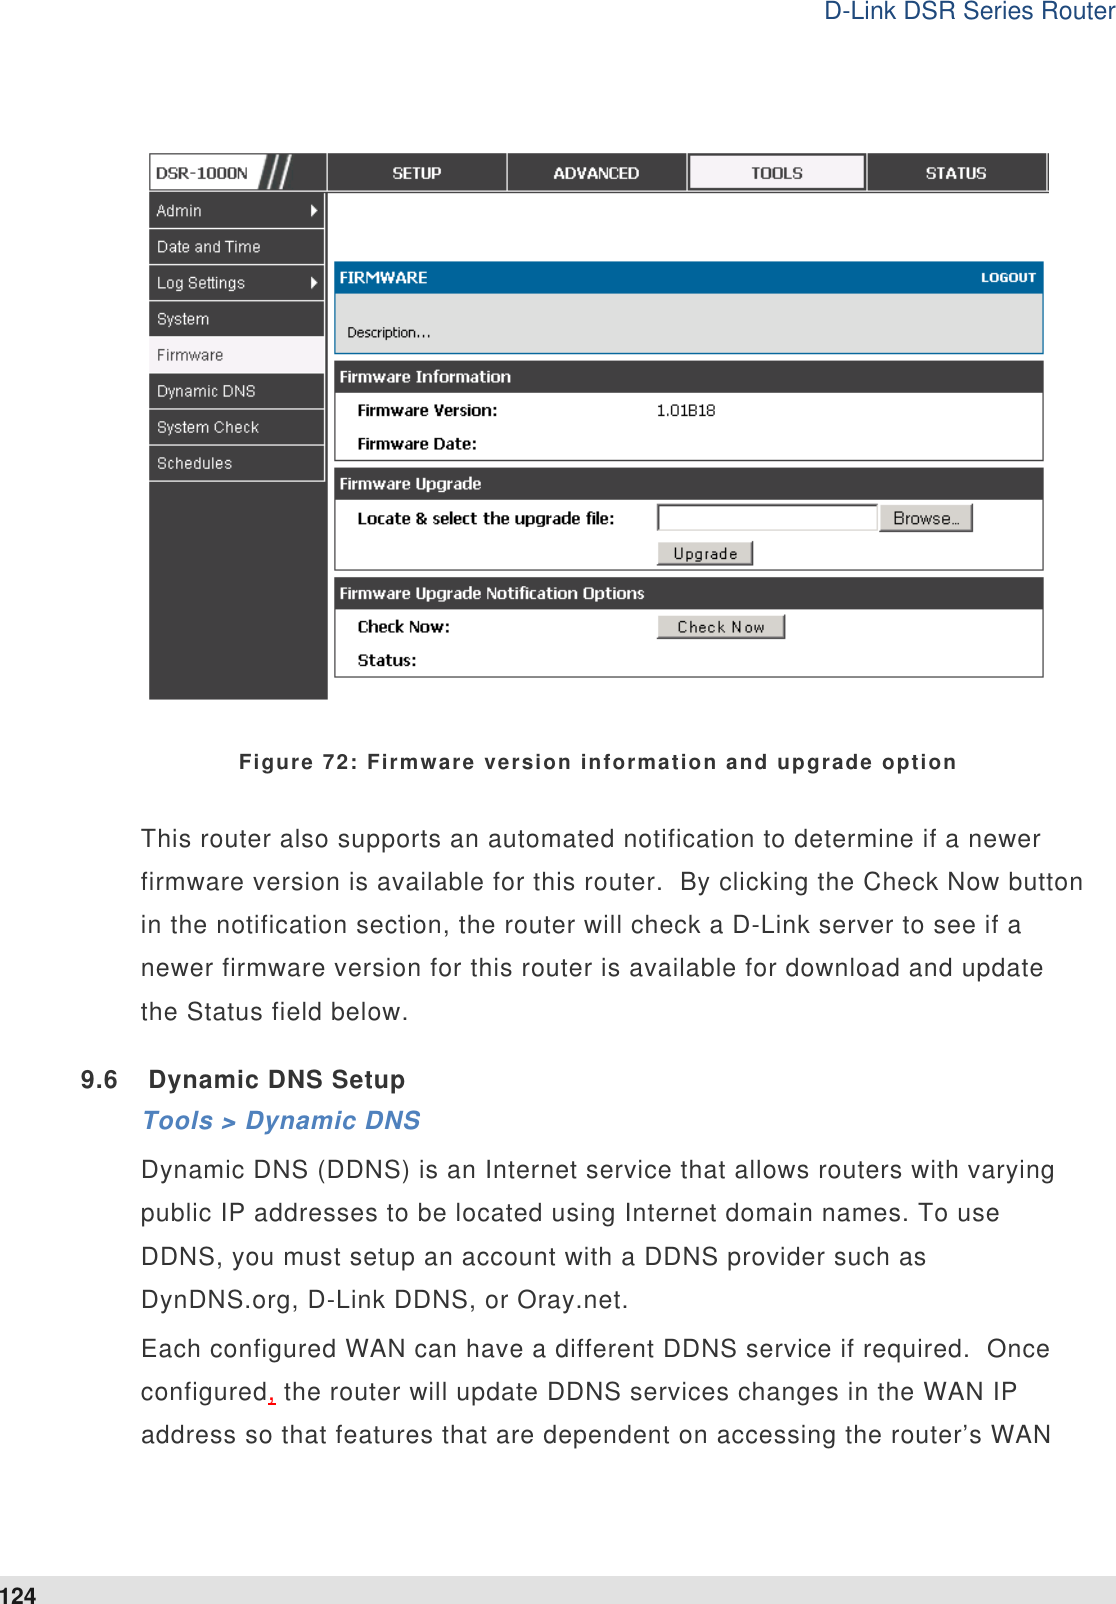 D-Link DSR Series Router 124   Figure 72: Firmware version information and upgrade option This router also supports an automated notification to determine if a newer firmware version is available for this router.  By clicking the Check Now button in the notification section, the router will check a D-Link server to see if a newer firmware version for this router is available for download and update the Status field below.  9.6  Dynamic DNS Setup Tools &gt; Dynamic DNS Dynamic DNS (DDNS) is an Internet service that allows routers with varying public IP addresses to be located using Internet domain names. To use DDNS, you must setup an account with a DDNS provider such as DynDNS.org, D-Link DDNS, or Oray.net.   Each configured WAN can have a different DDNS service if required.  Once configured, the router will update DDNS services changes in the WAN IP address so that features that are dependent on accessing the router’s WAN 